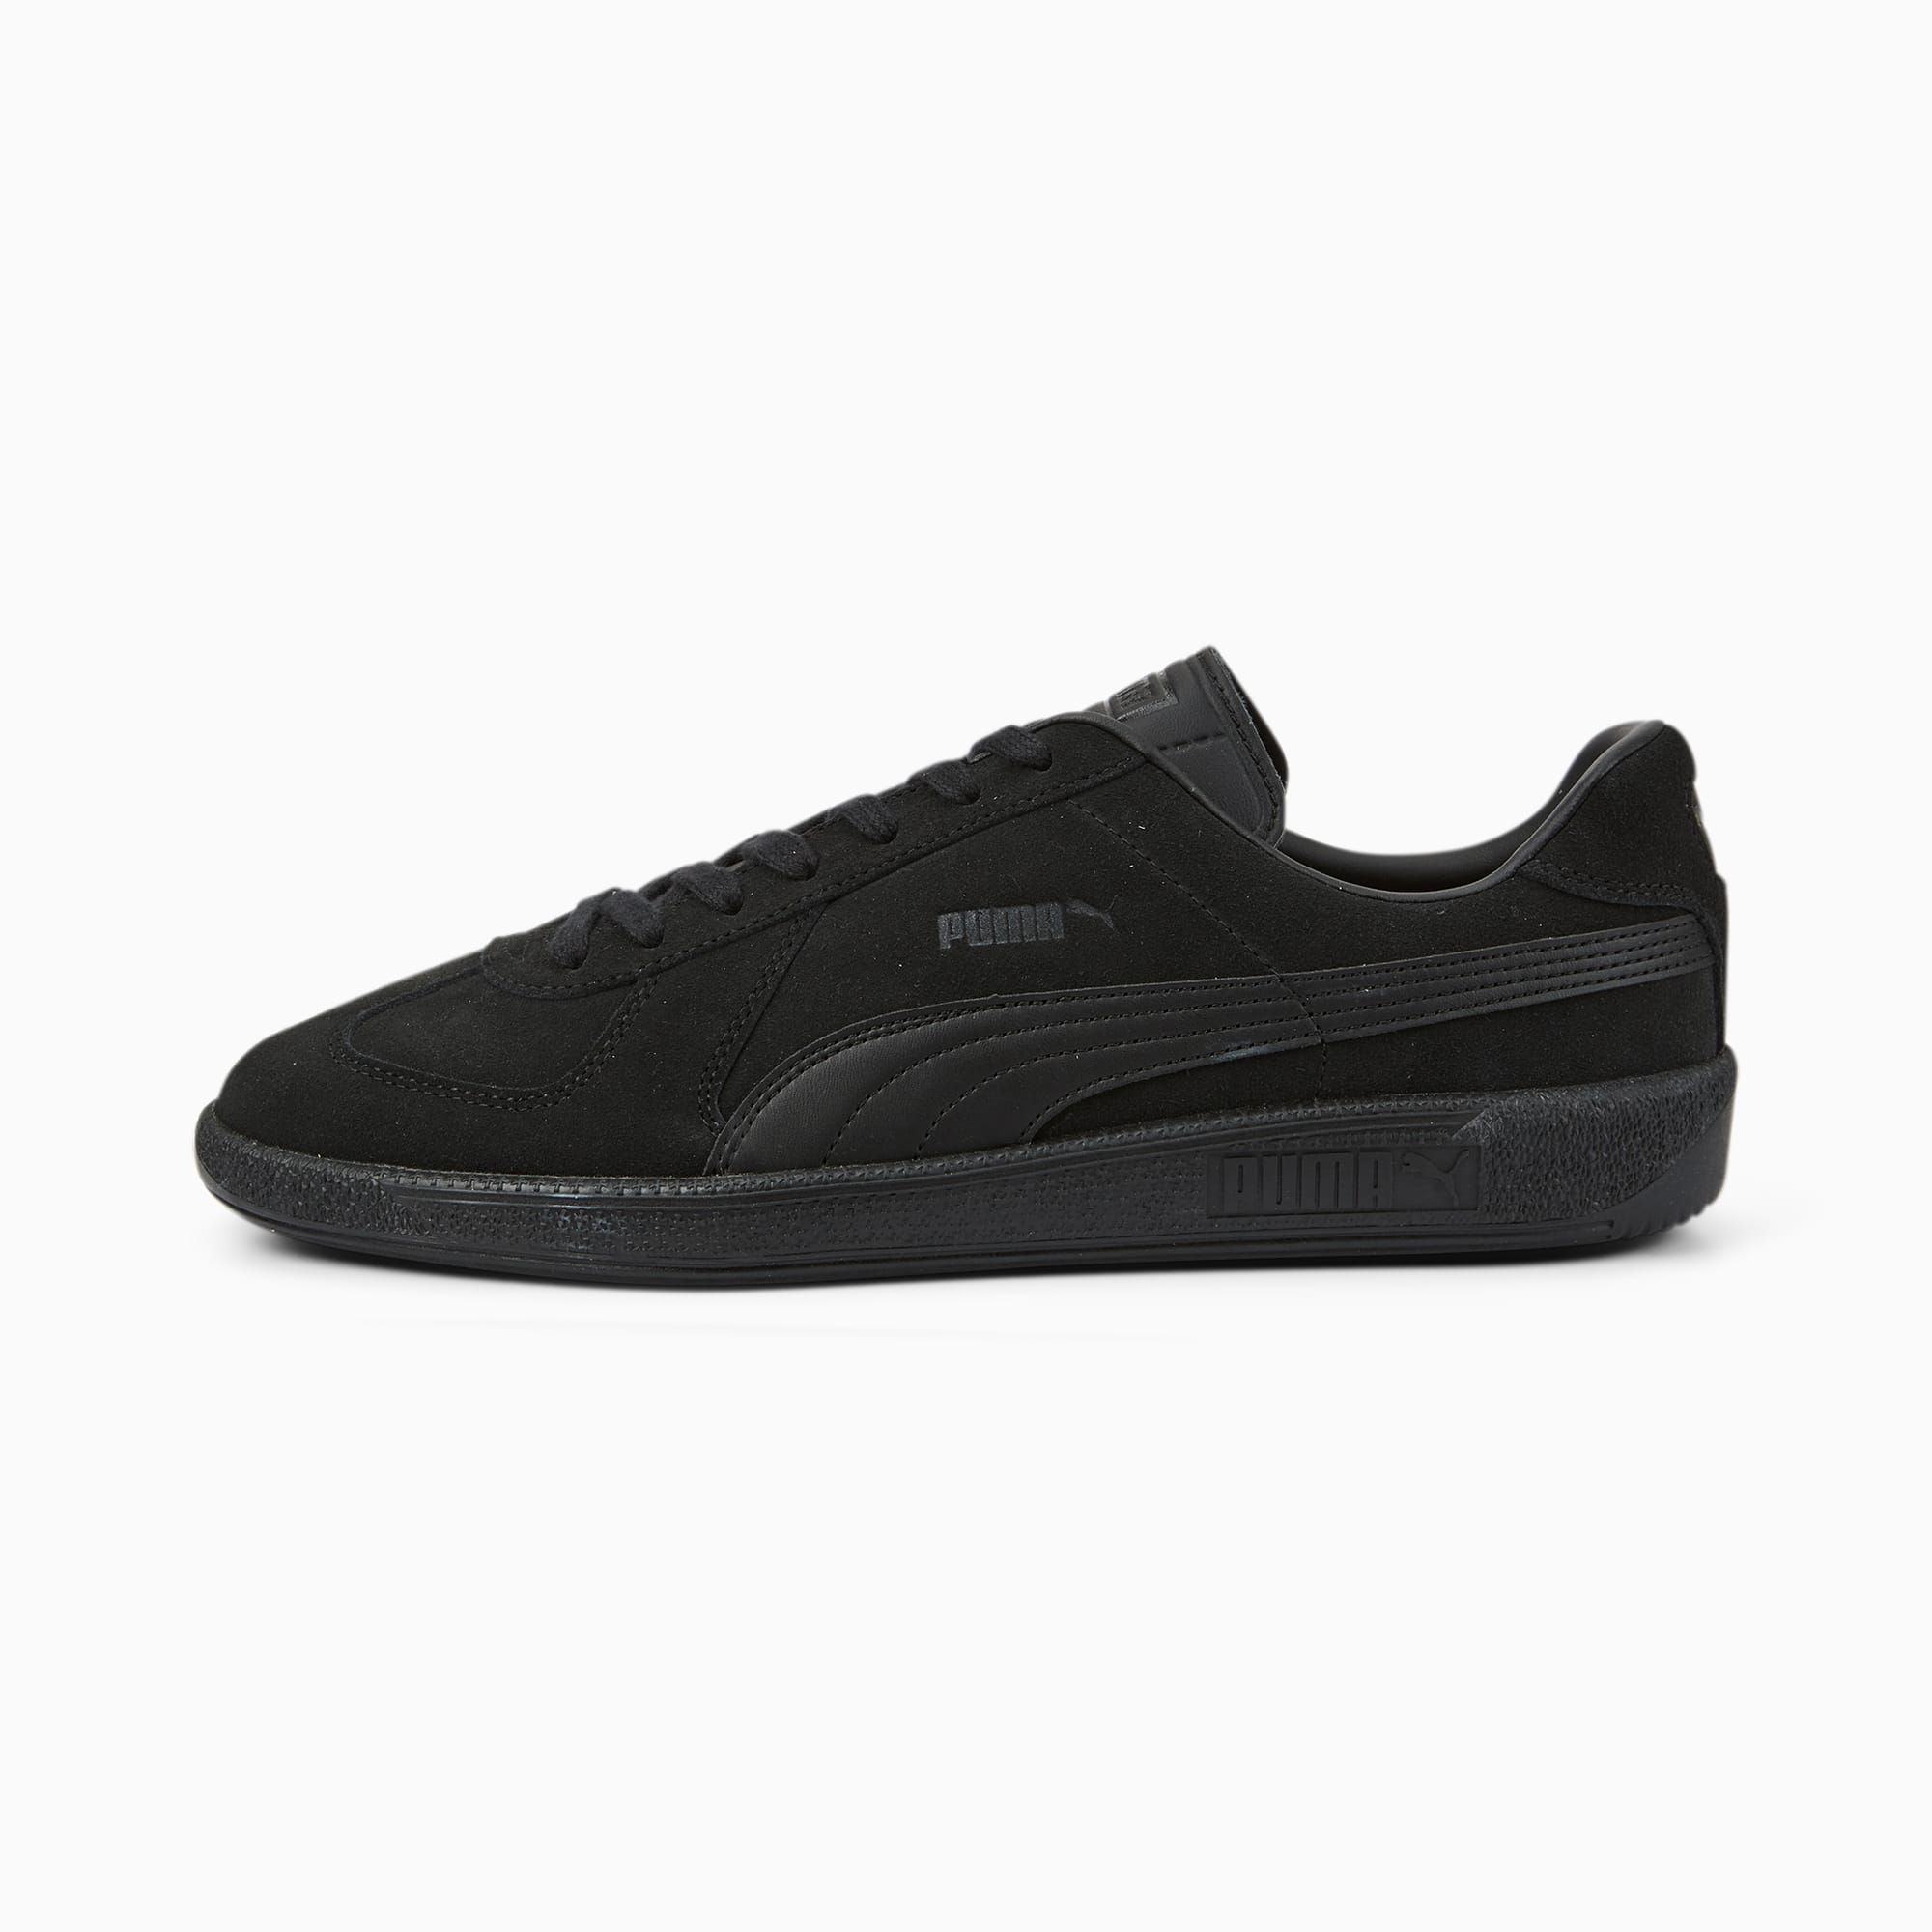 Army Trainer Suede Sneakers | PUMA